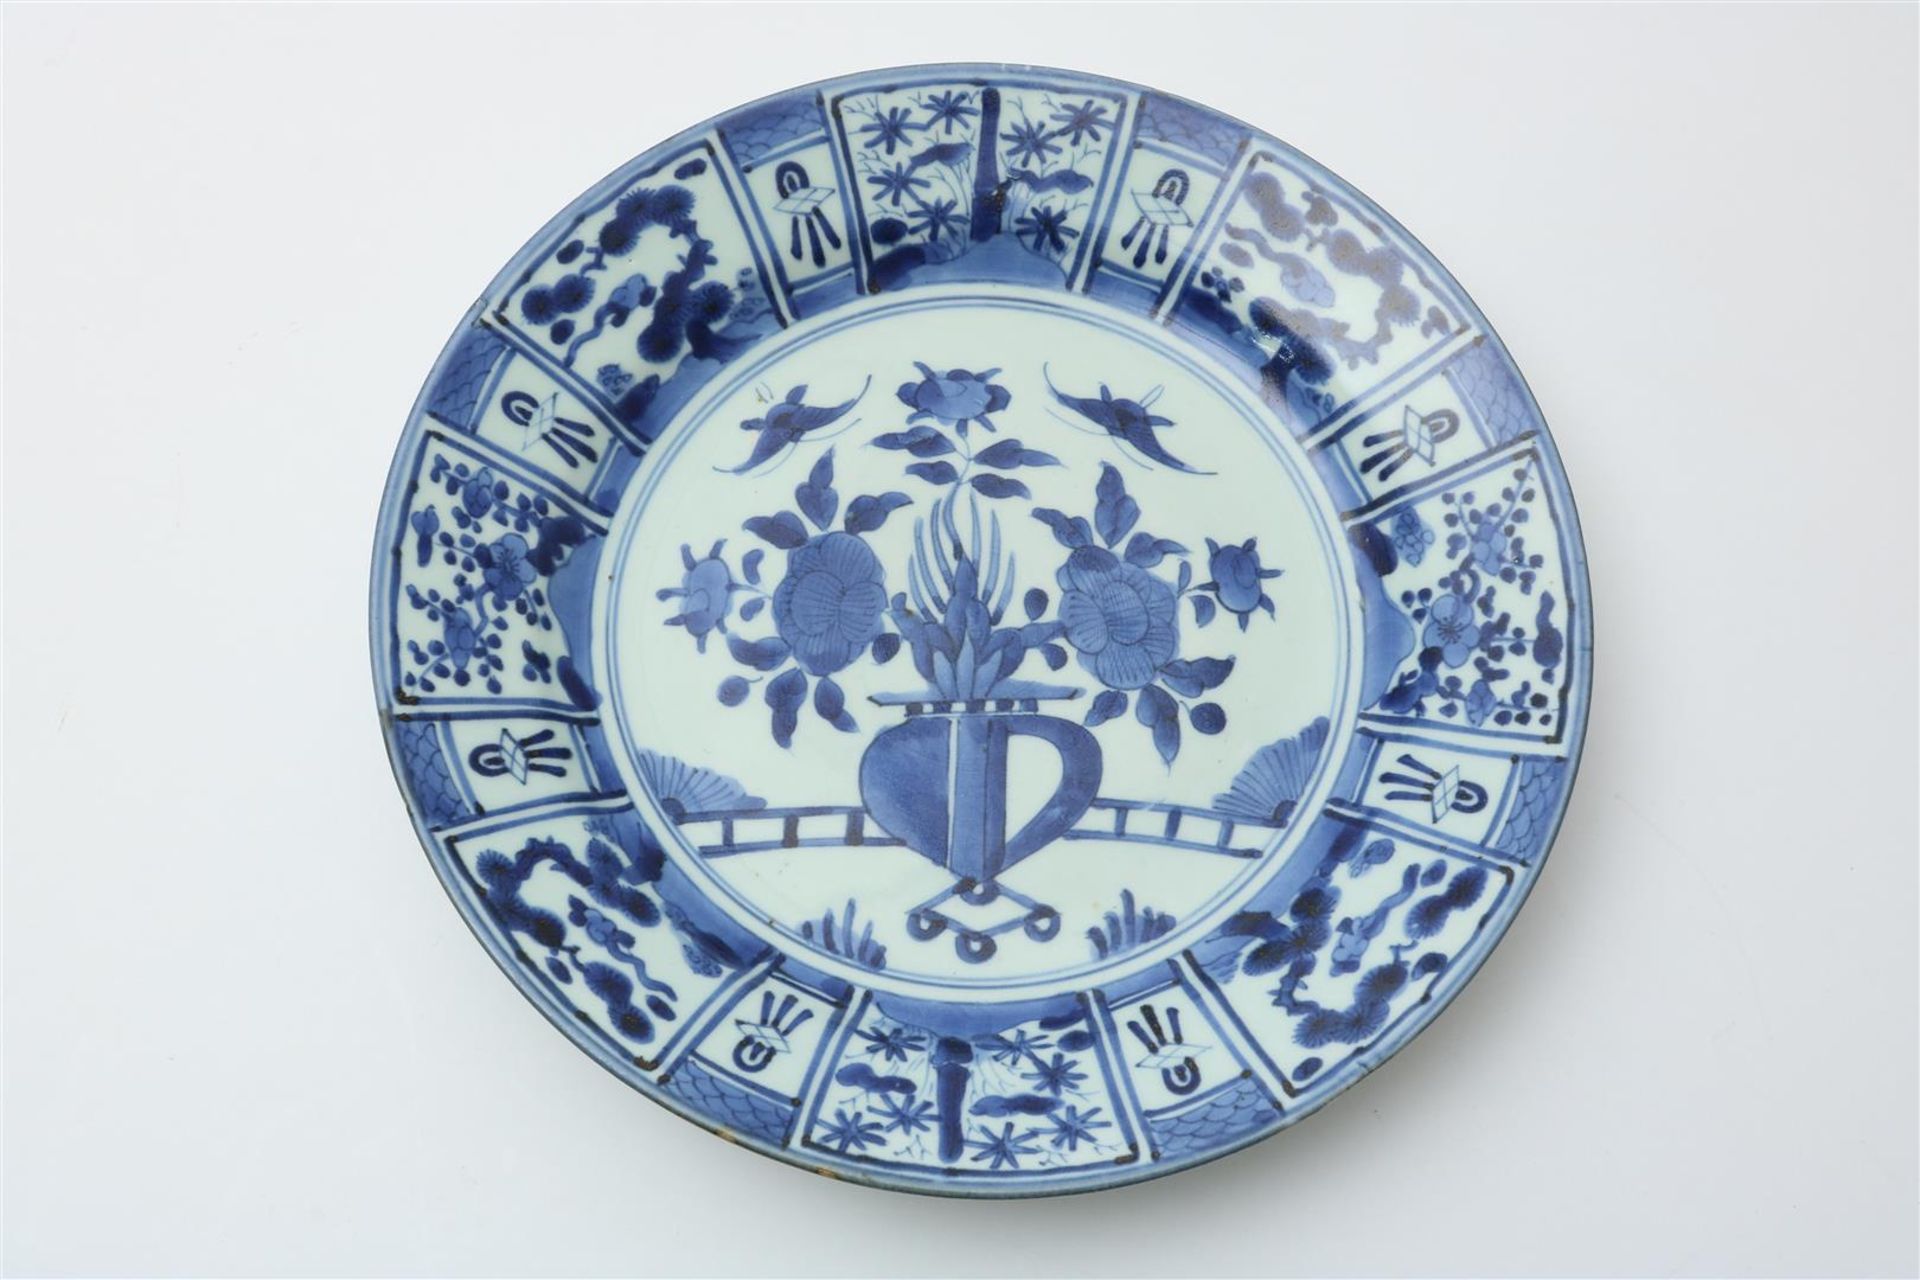 Porcelain Arita dish with central decoration of flowers in vase and cartouche edge decoration,